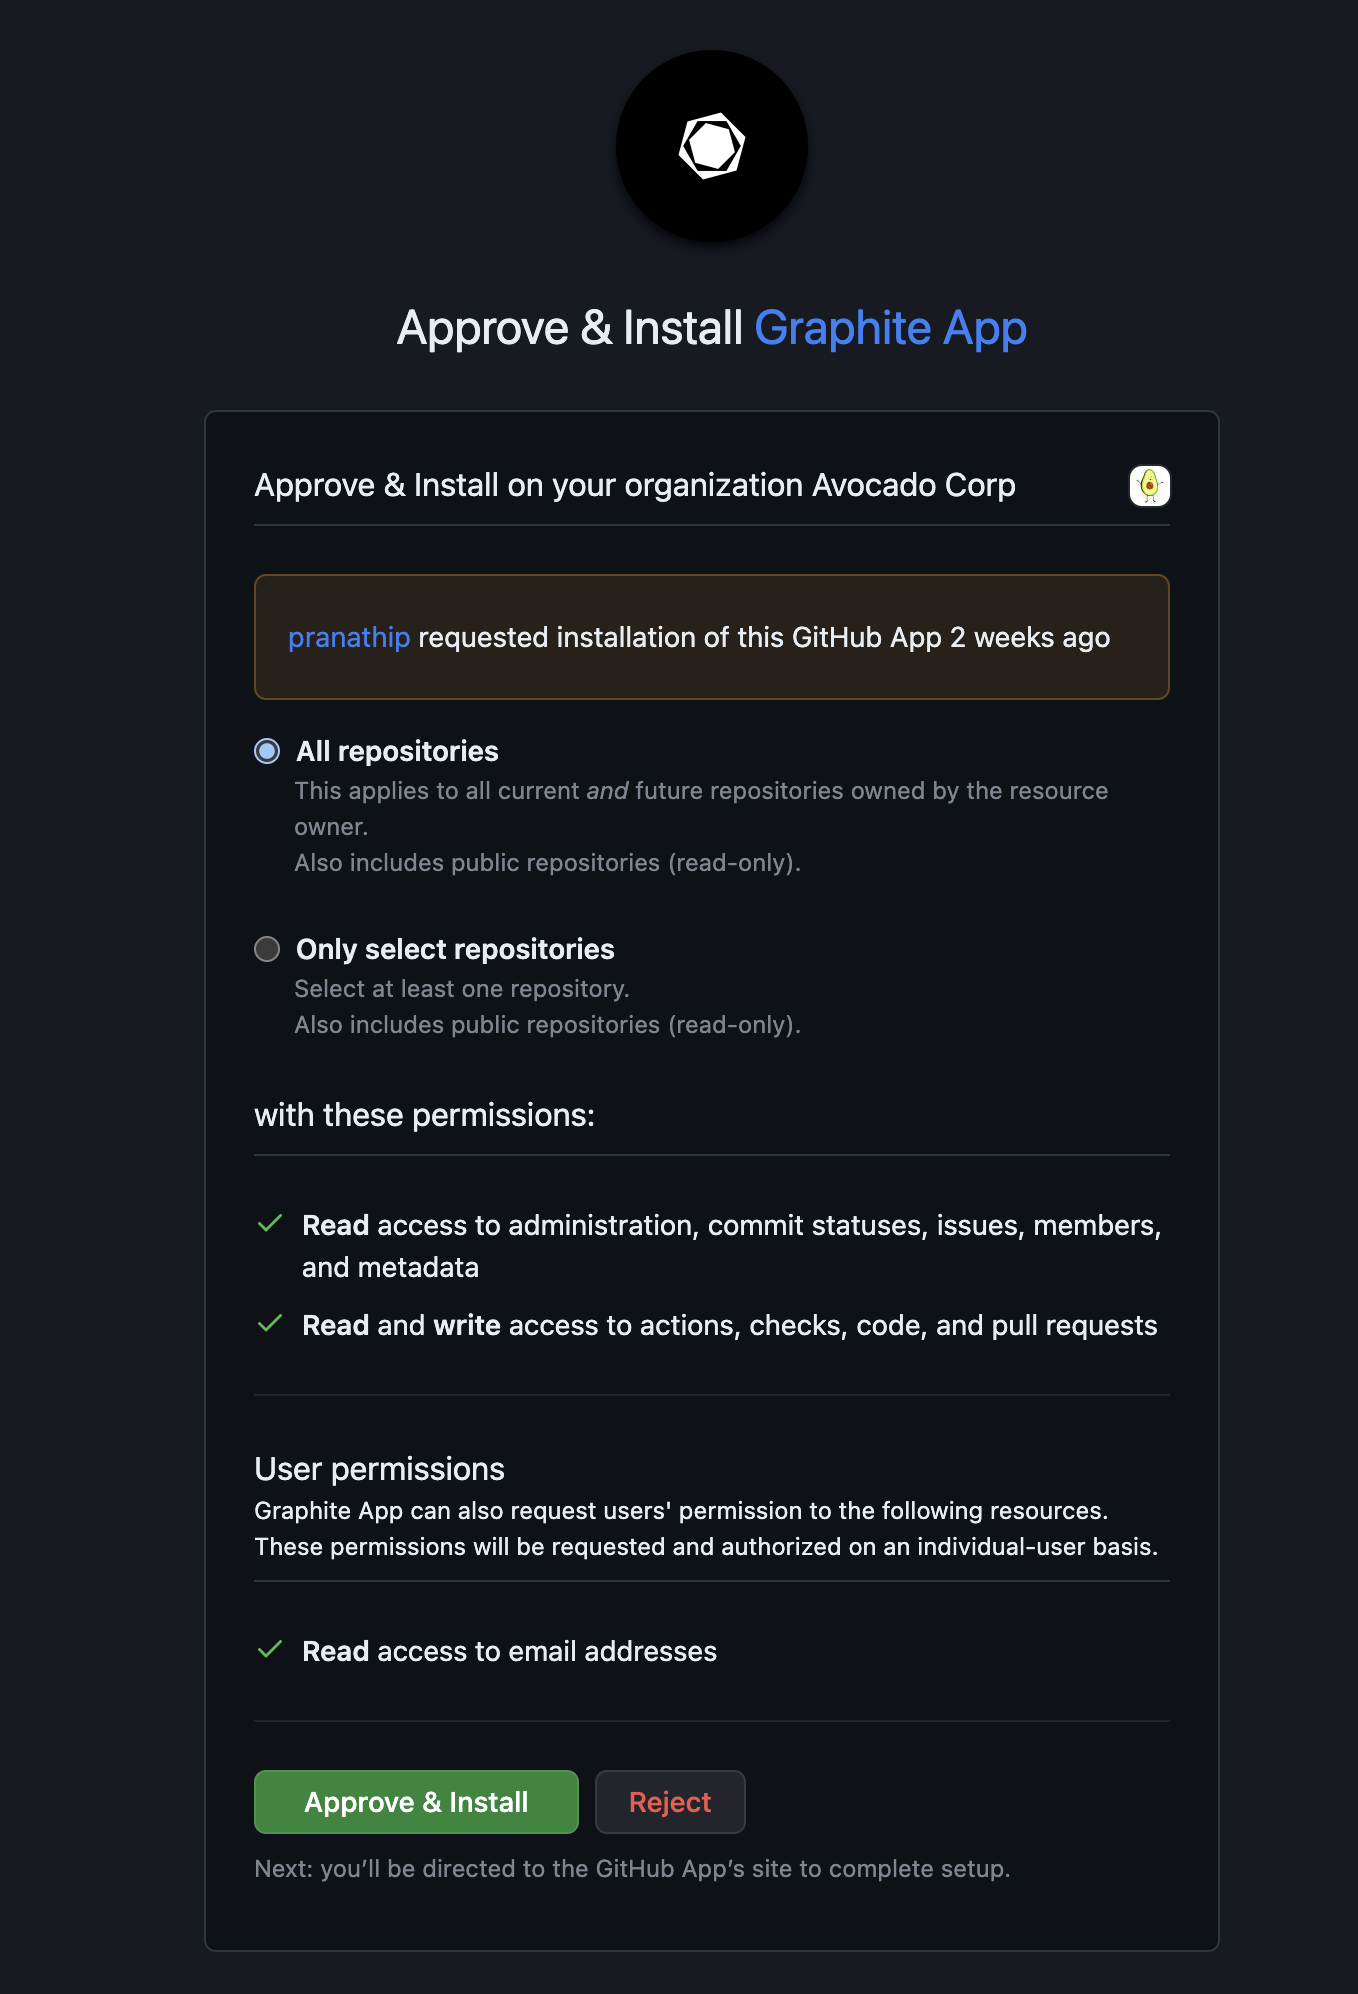 Approve and install Graphite app for all or select repositories